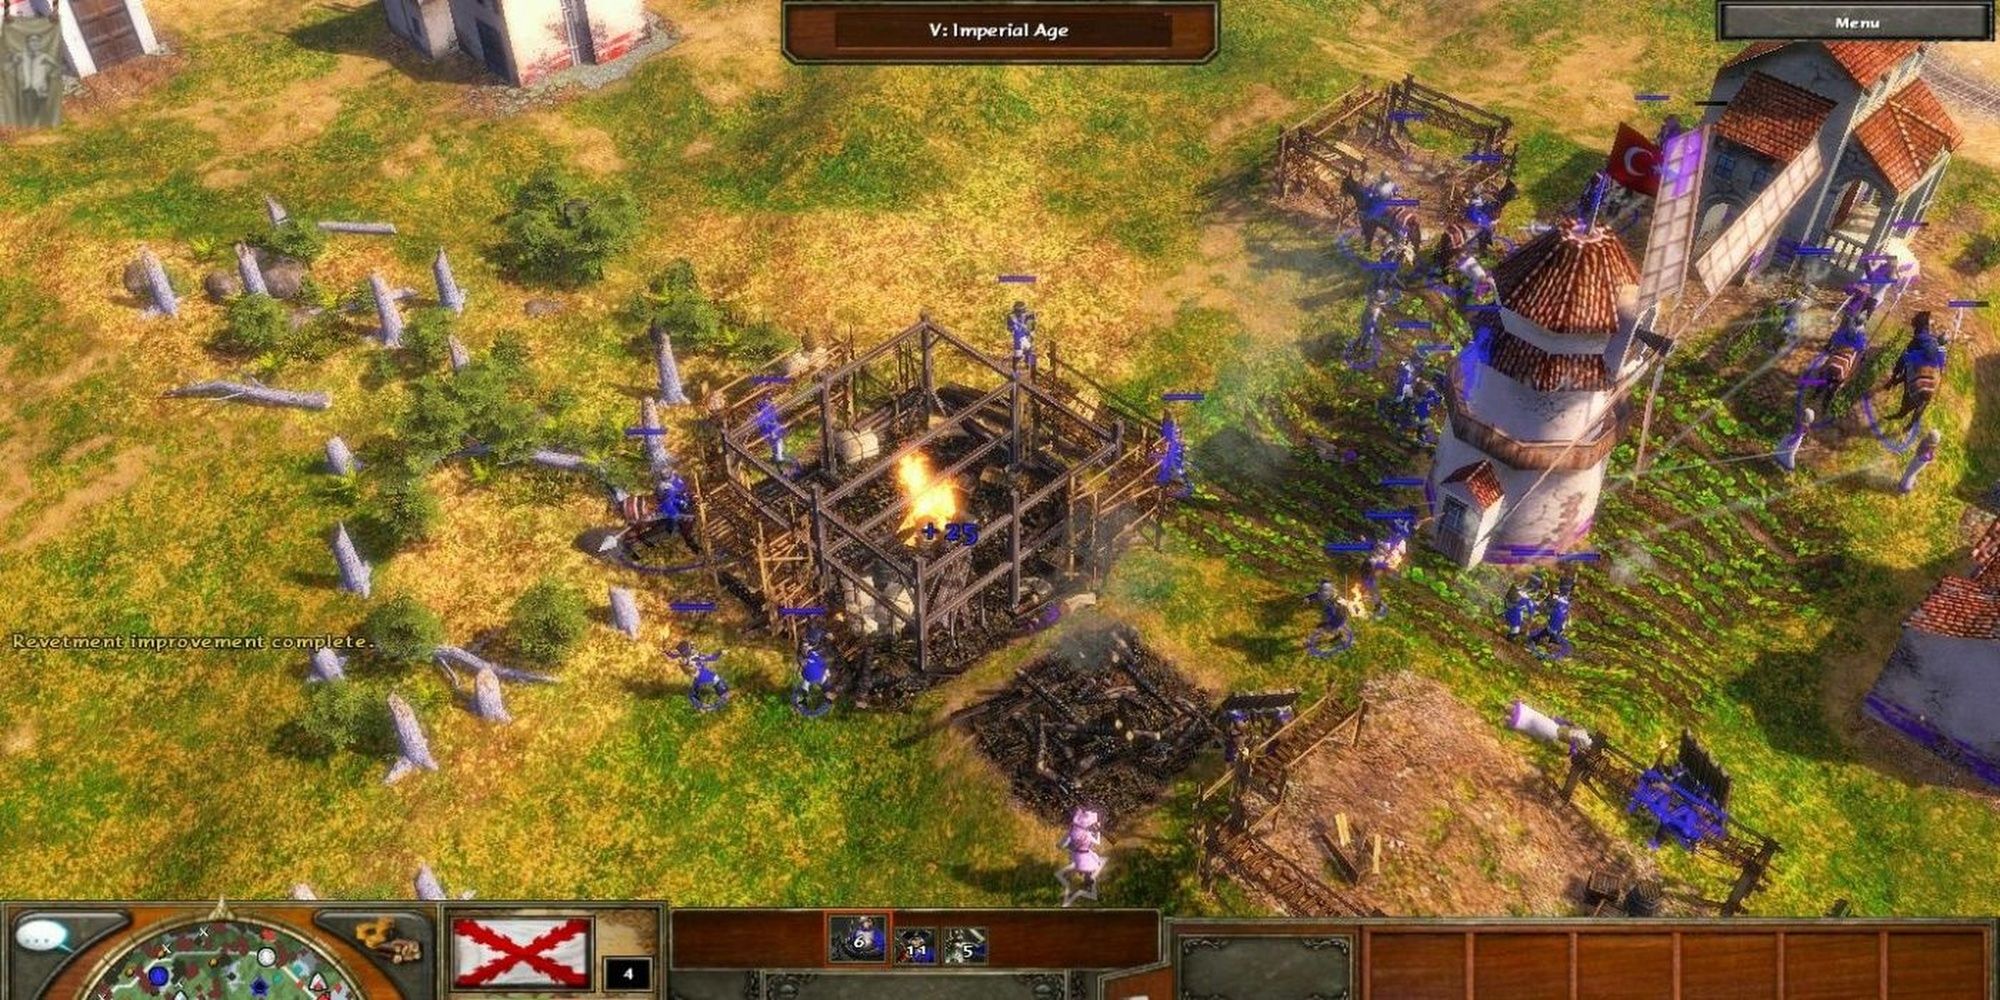 remove population limit age of empires 3